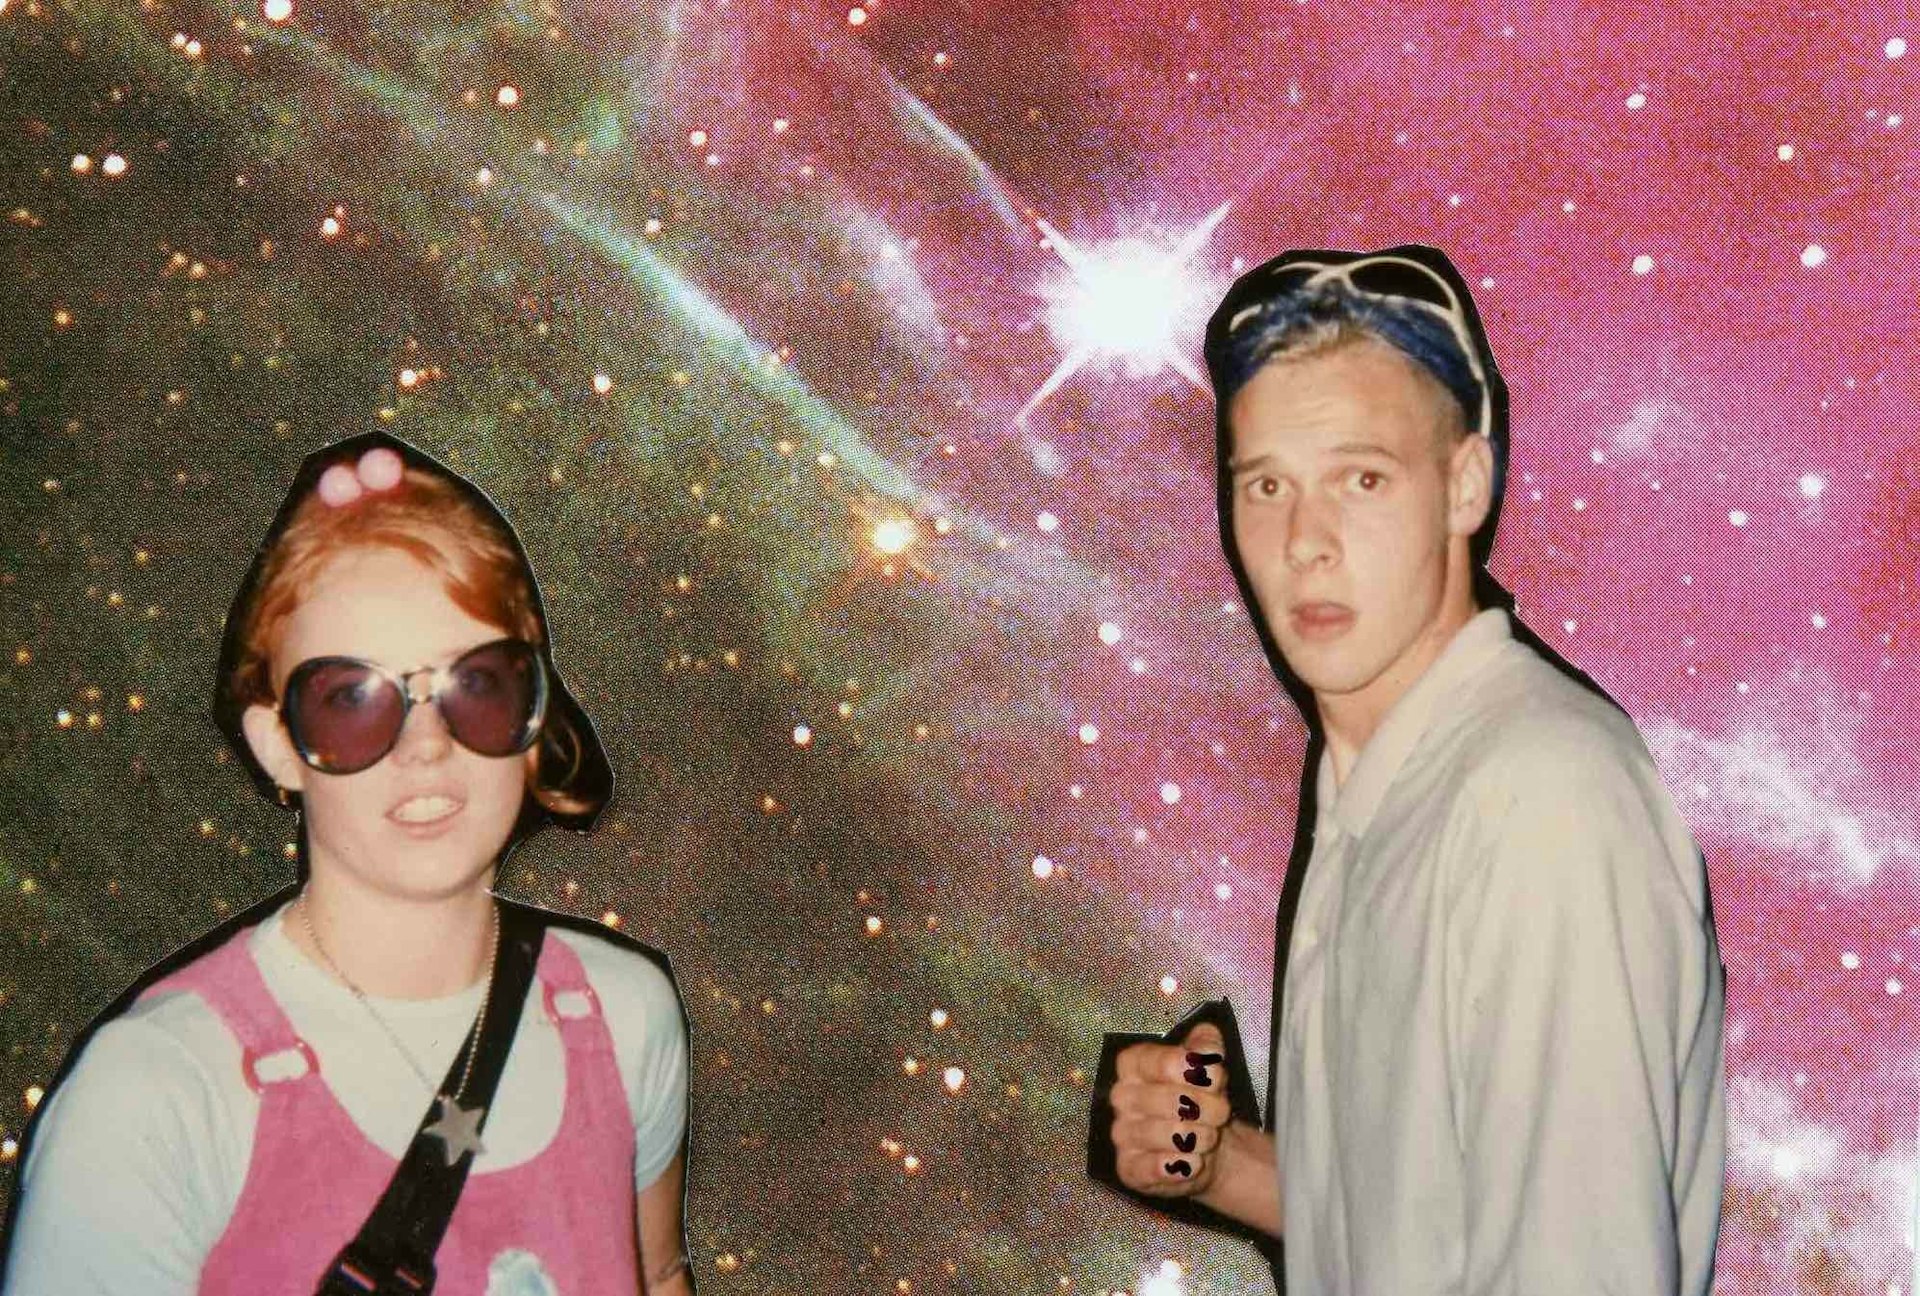 A visual history of America’s travelling rave scene